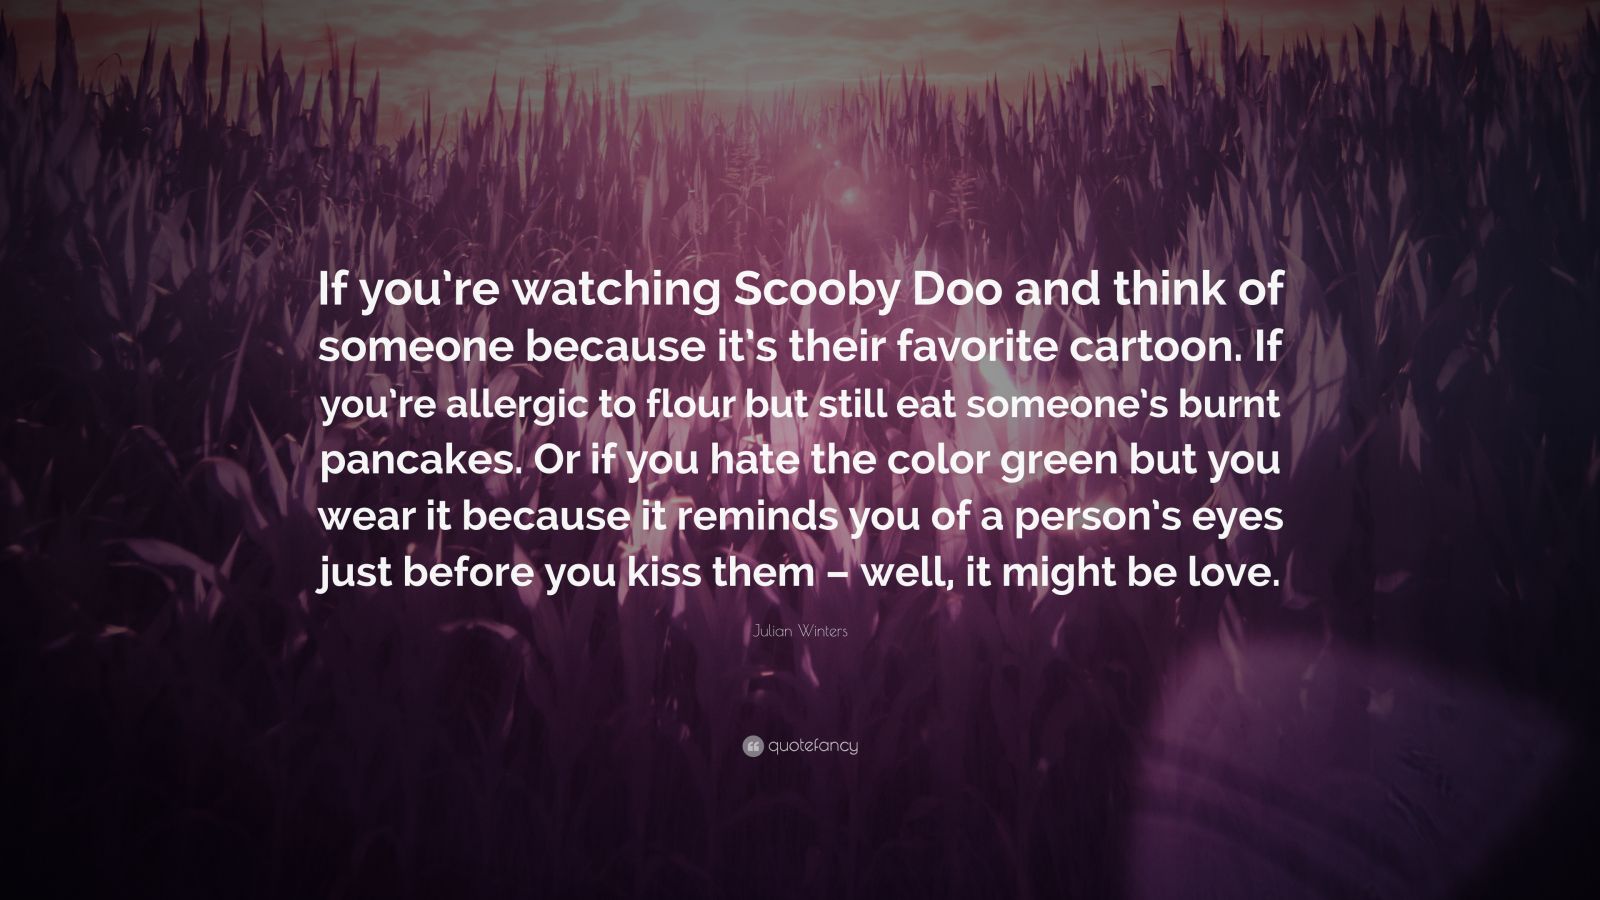 Julian Winters Quote: “If you’re watching Scooby Doo and think of ...